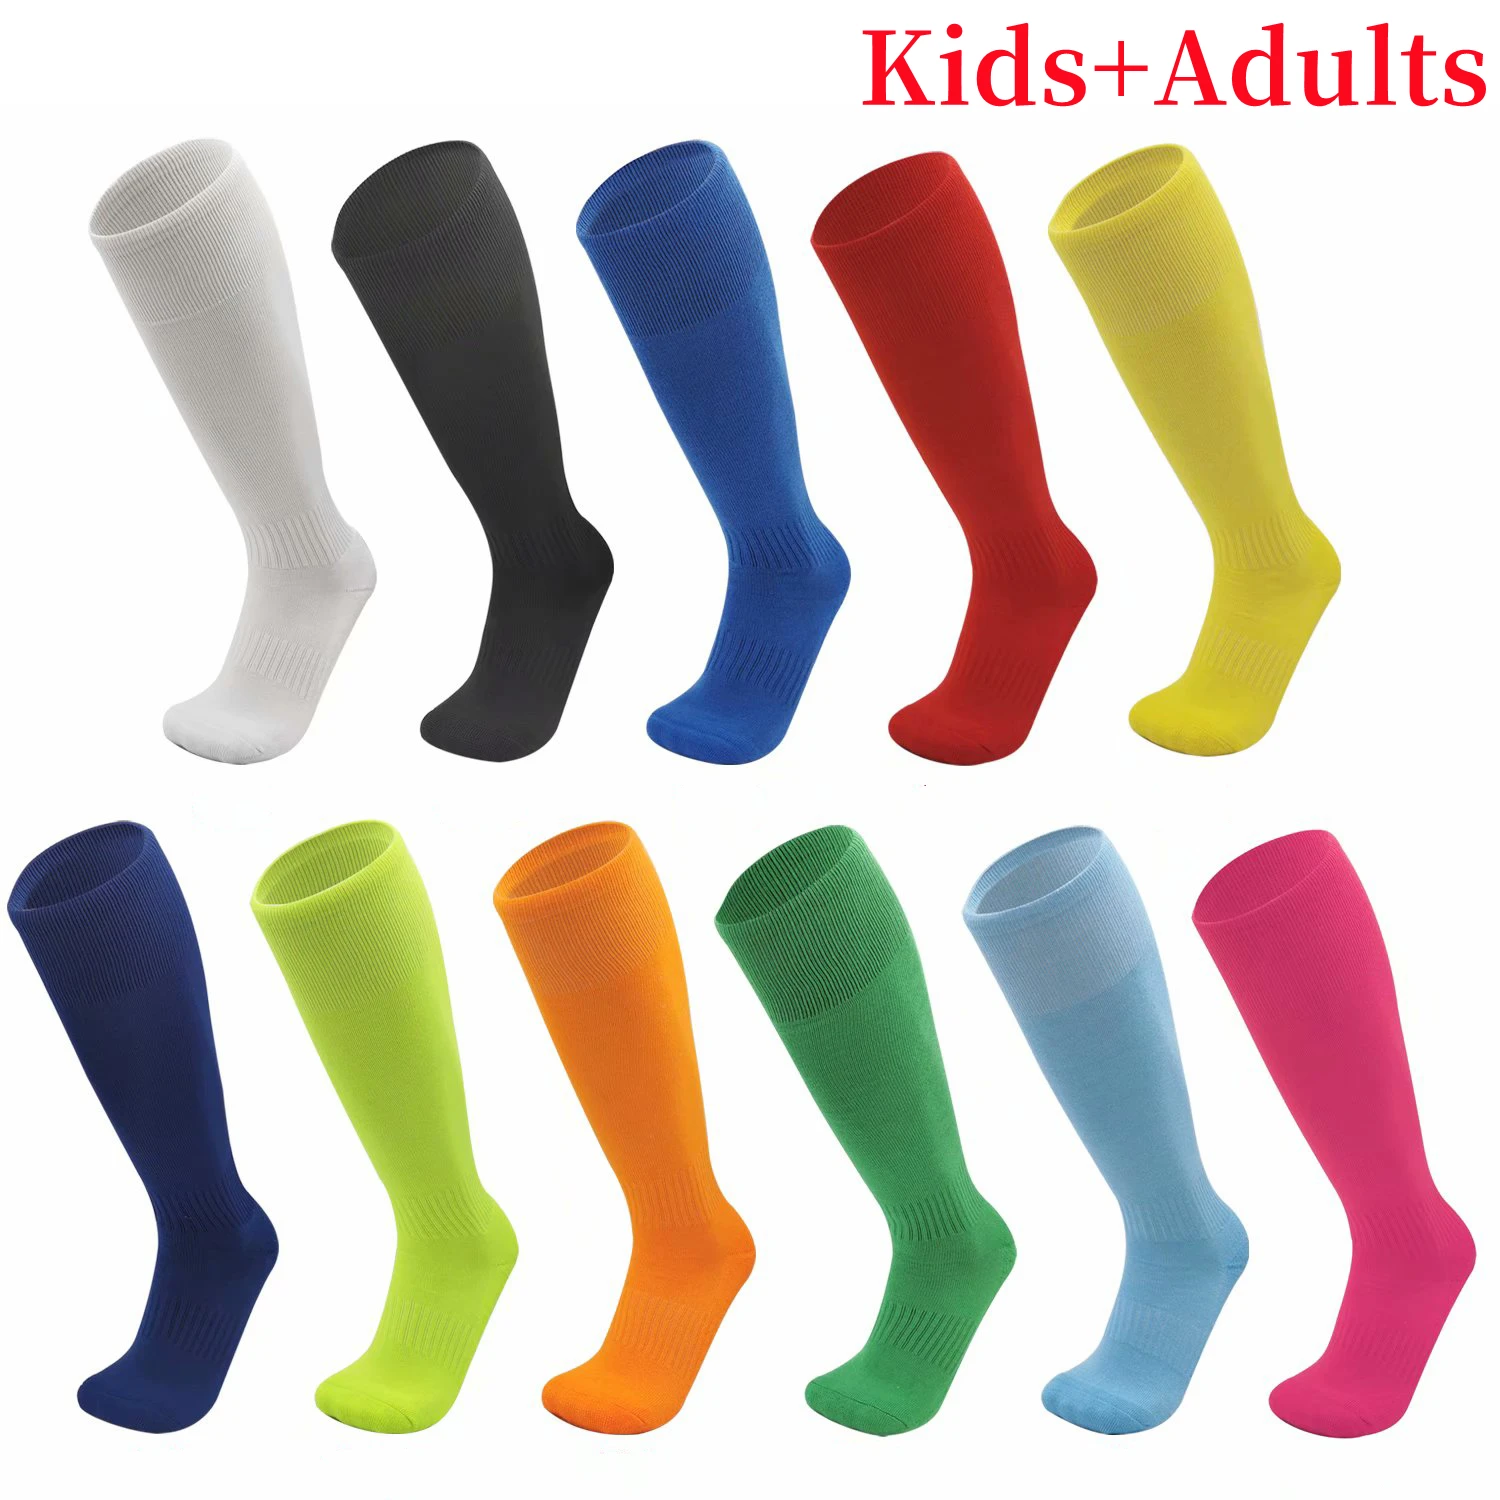 

Soccer Socks Breathable Outdoor Football Sports Rugby Stockings Over Knee High Volleyball Baseball Hockey Kids Adults Long Socks